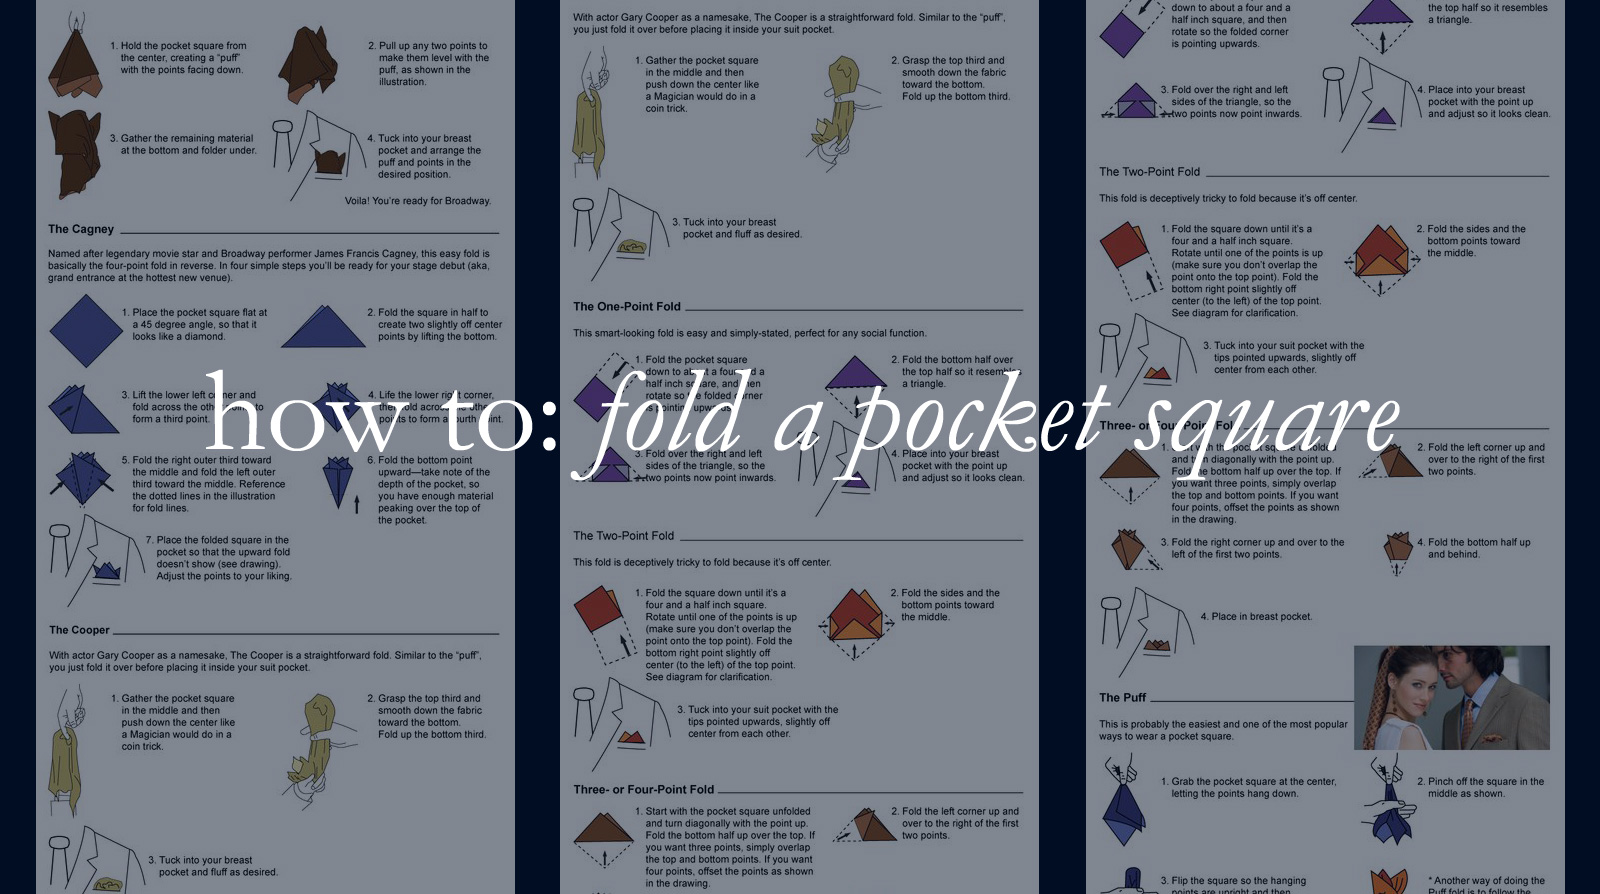 How to: fold a pocket square